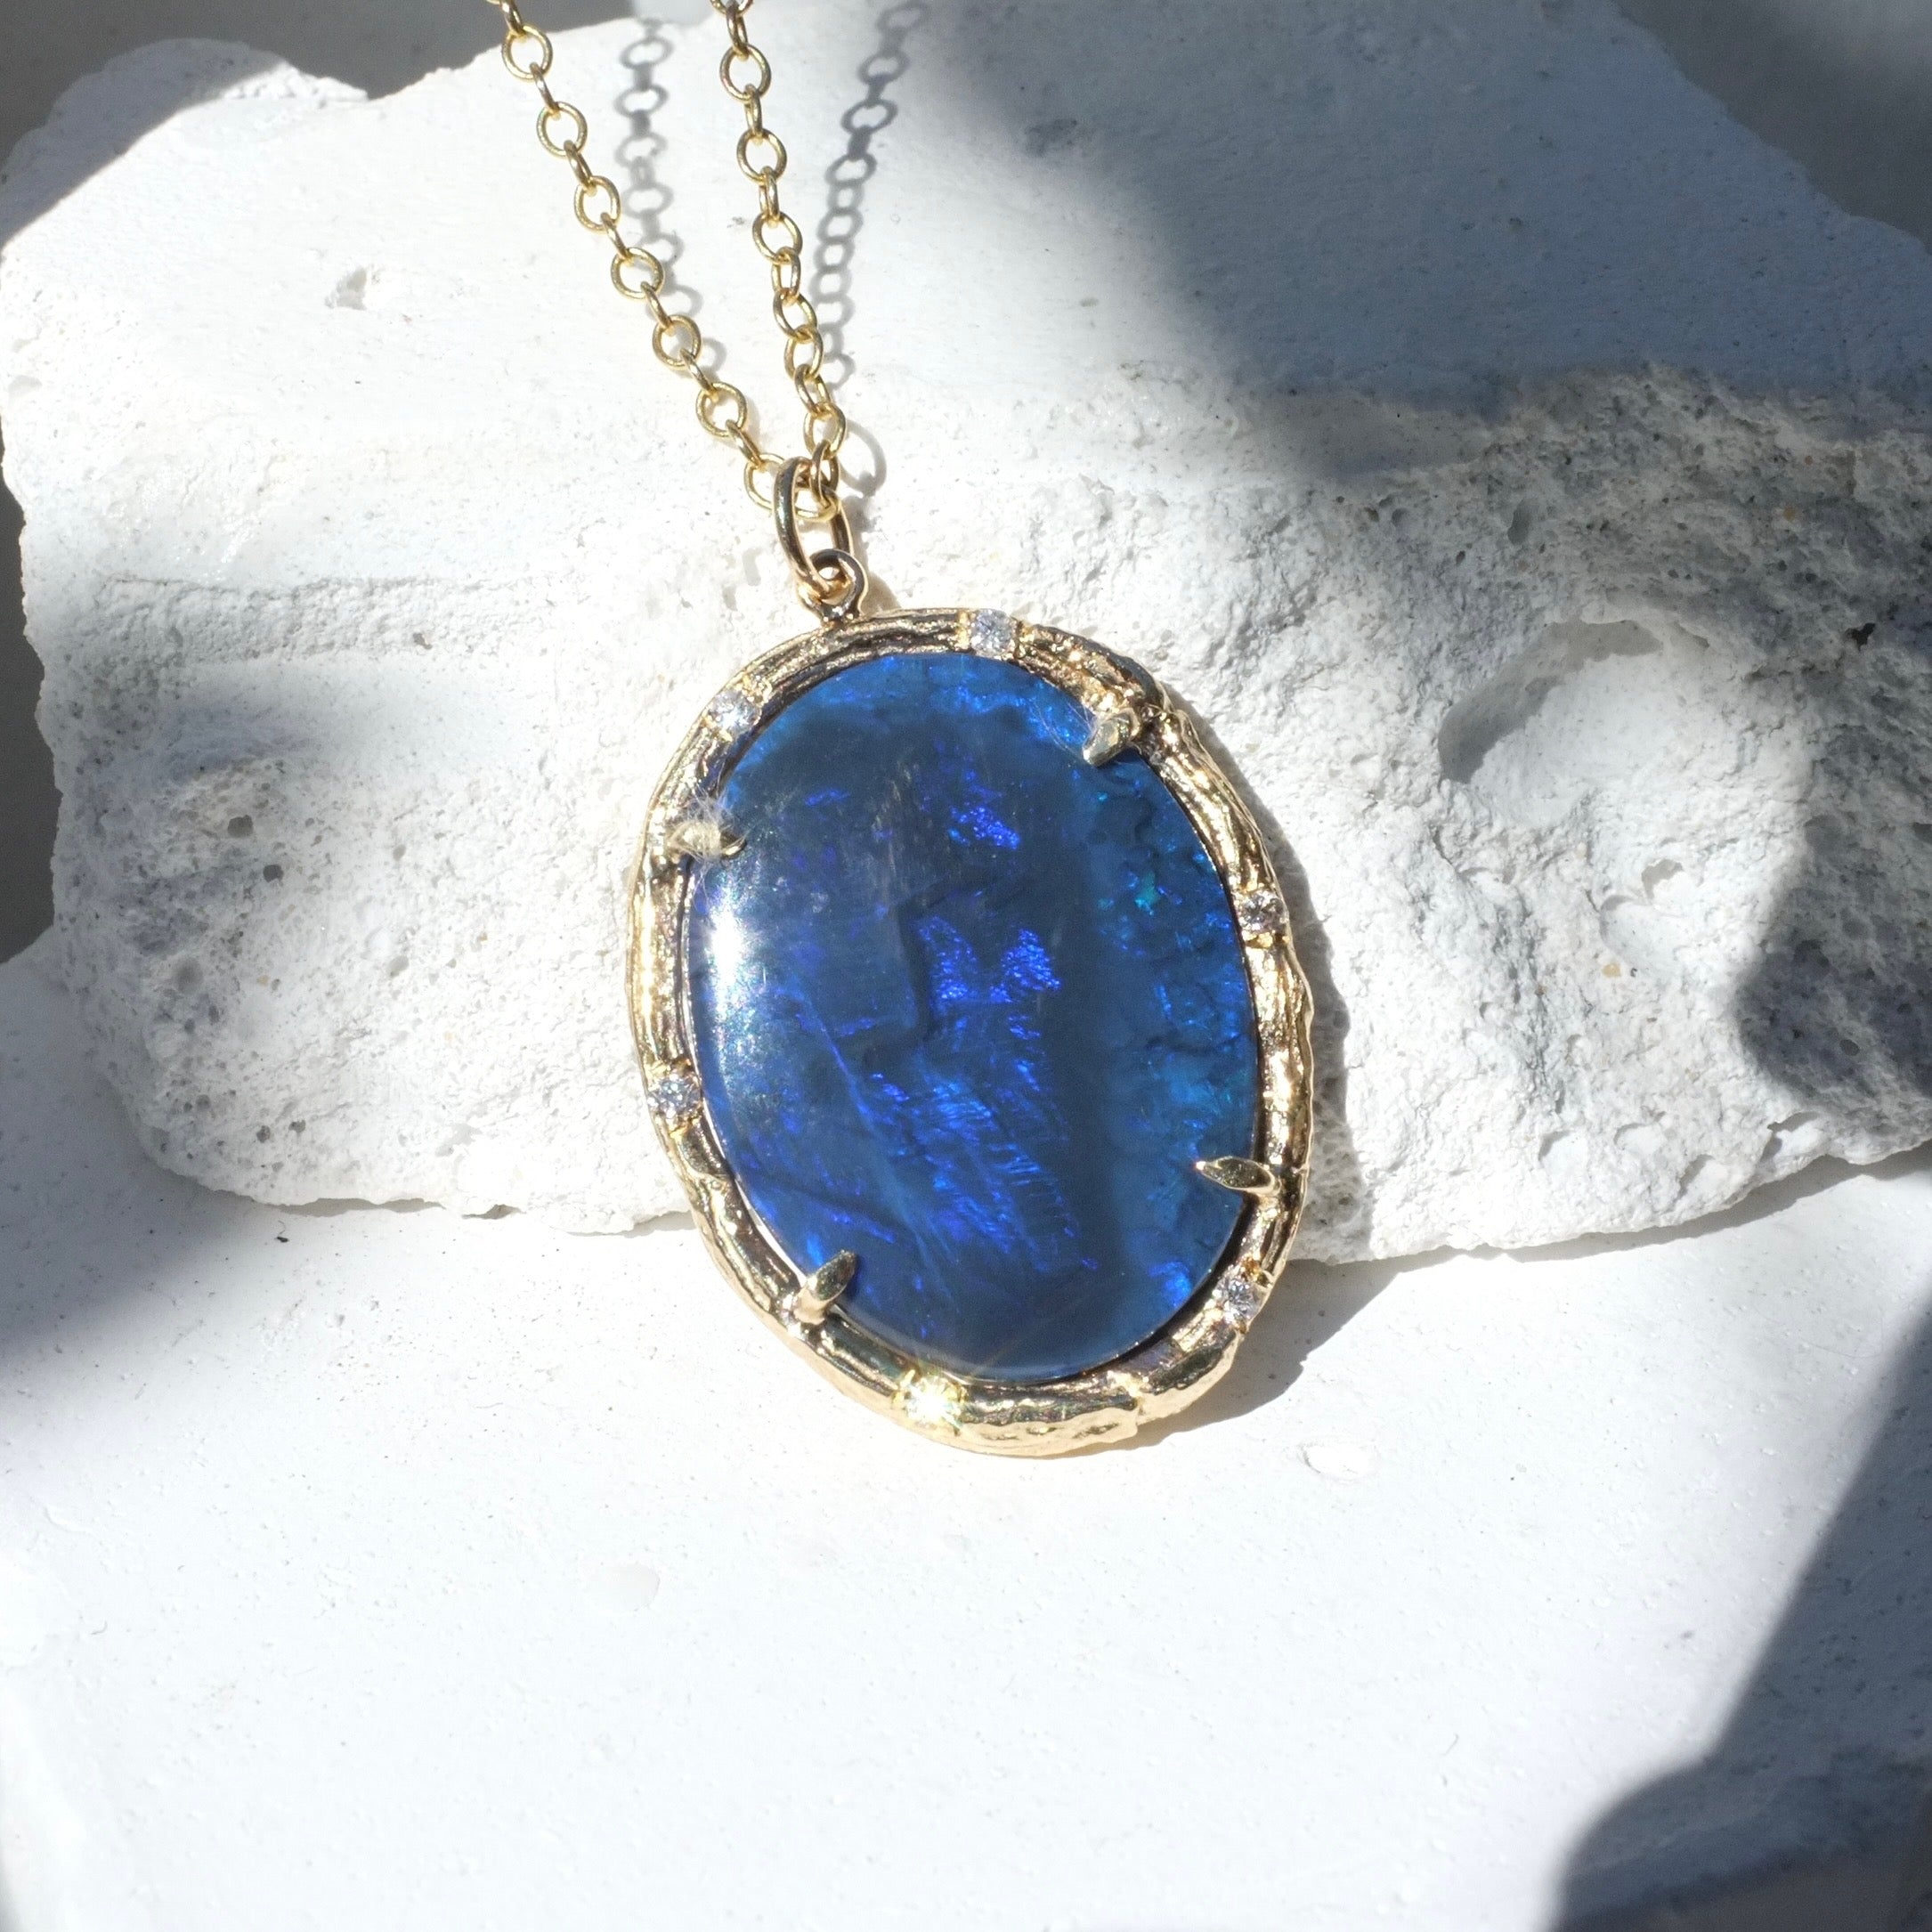 Mythical Blue Opal Necklace Pendant Elisabeth Bell Jewelry   